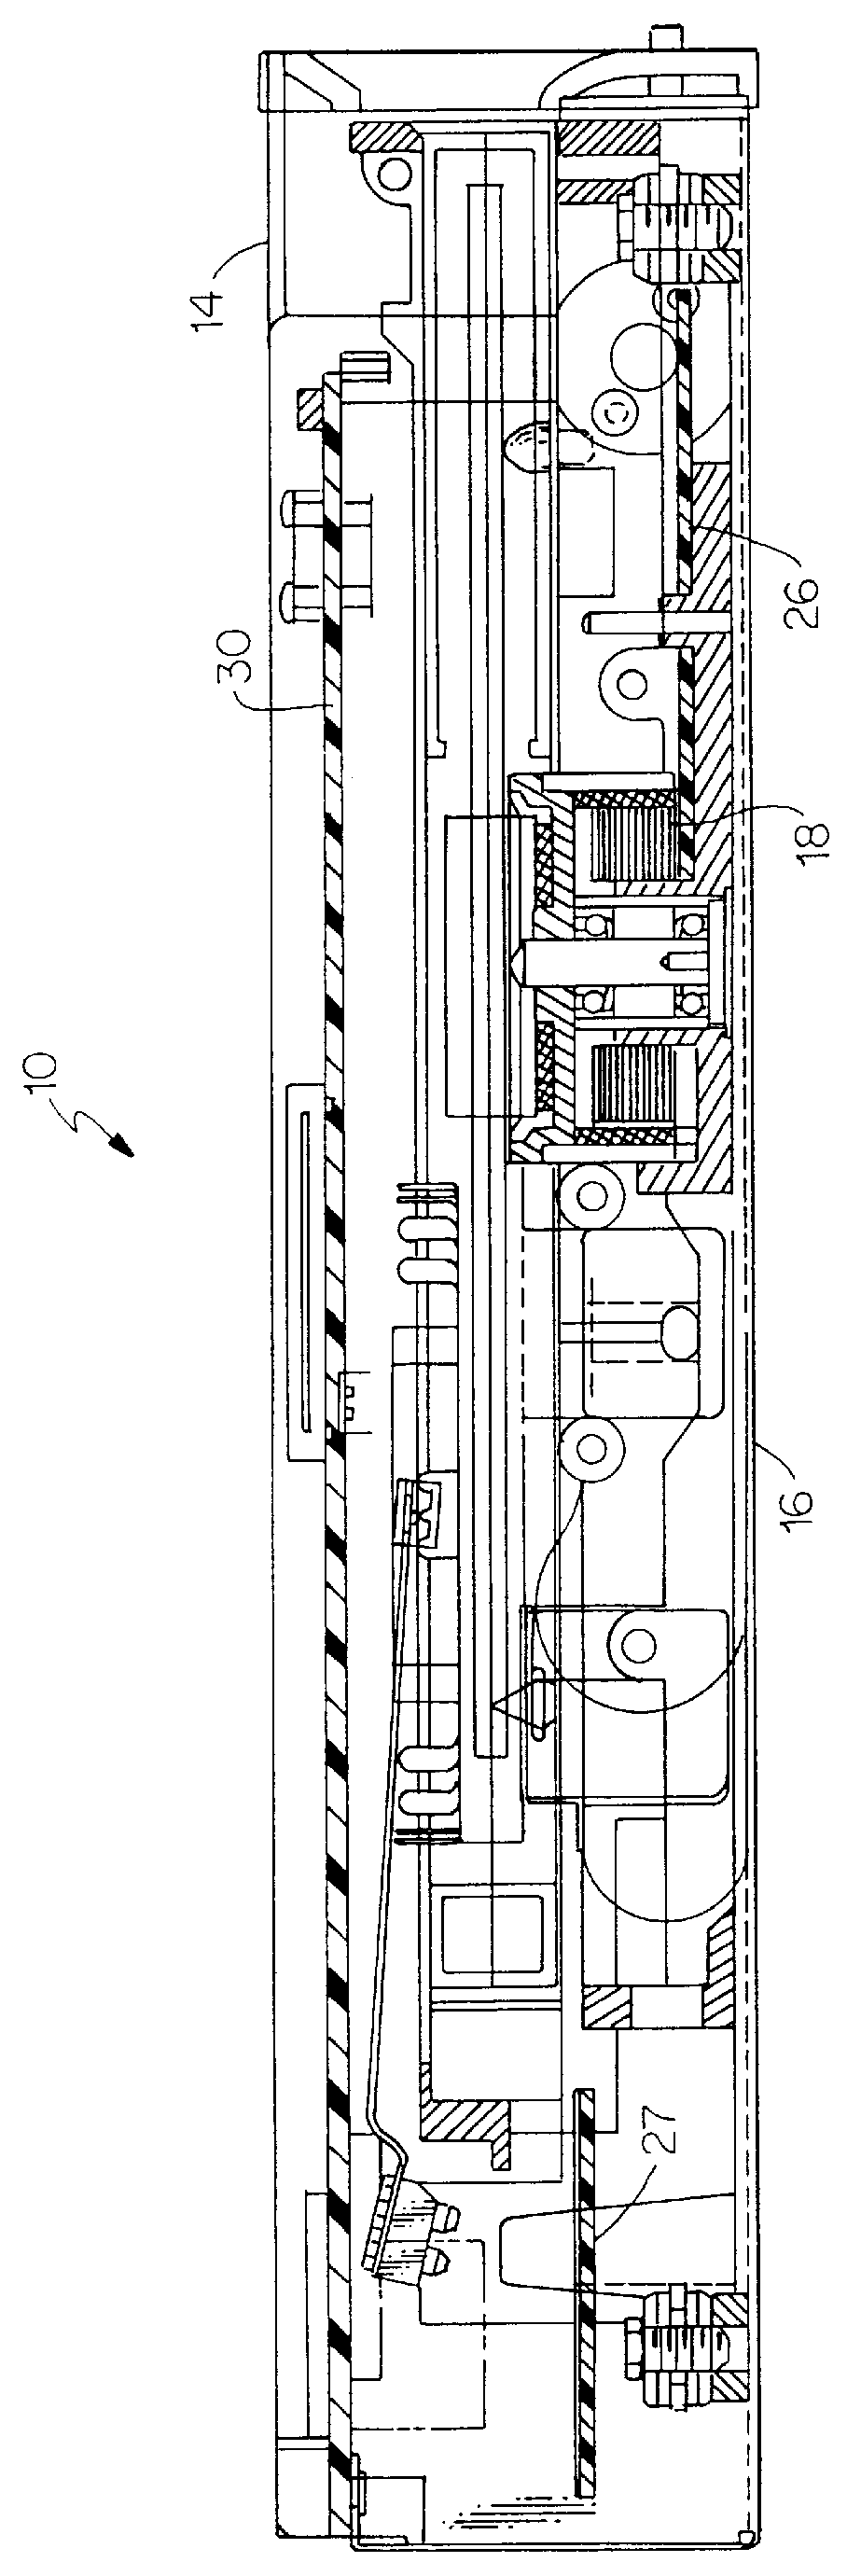 Optical disc system having improved circuitry for performing blank sector check on readable disc and method for operating same